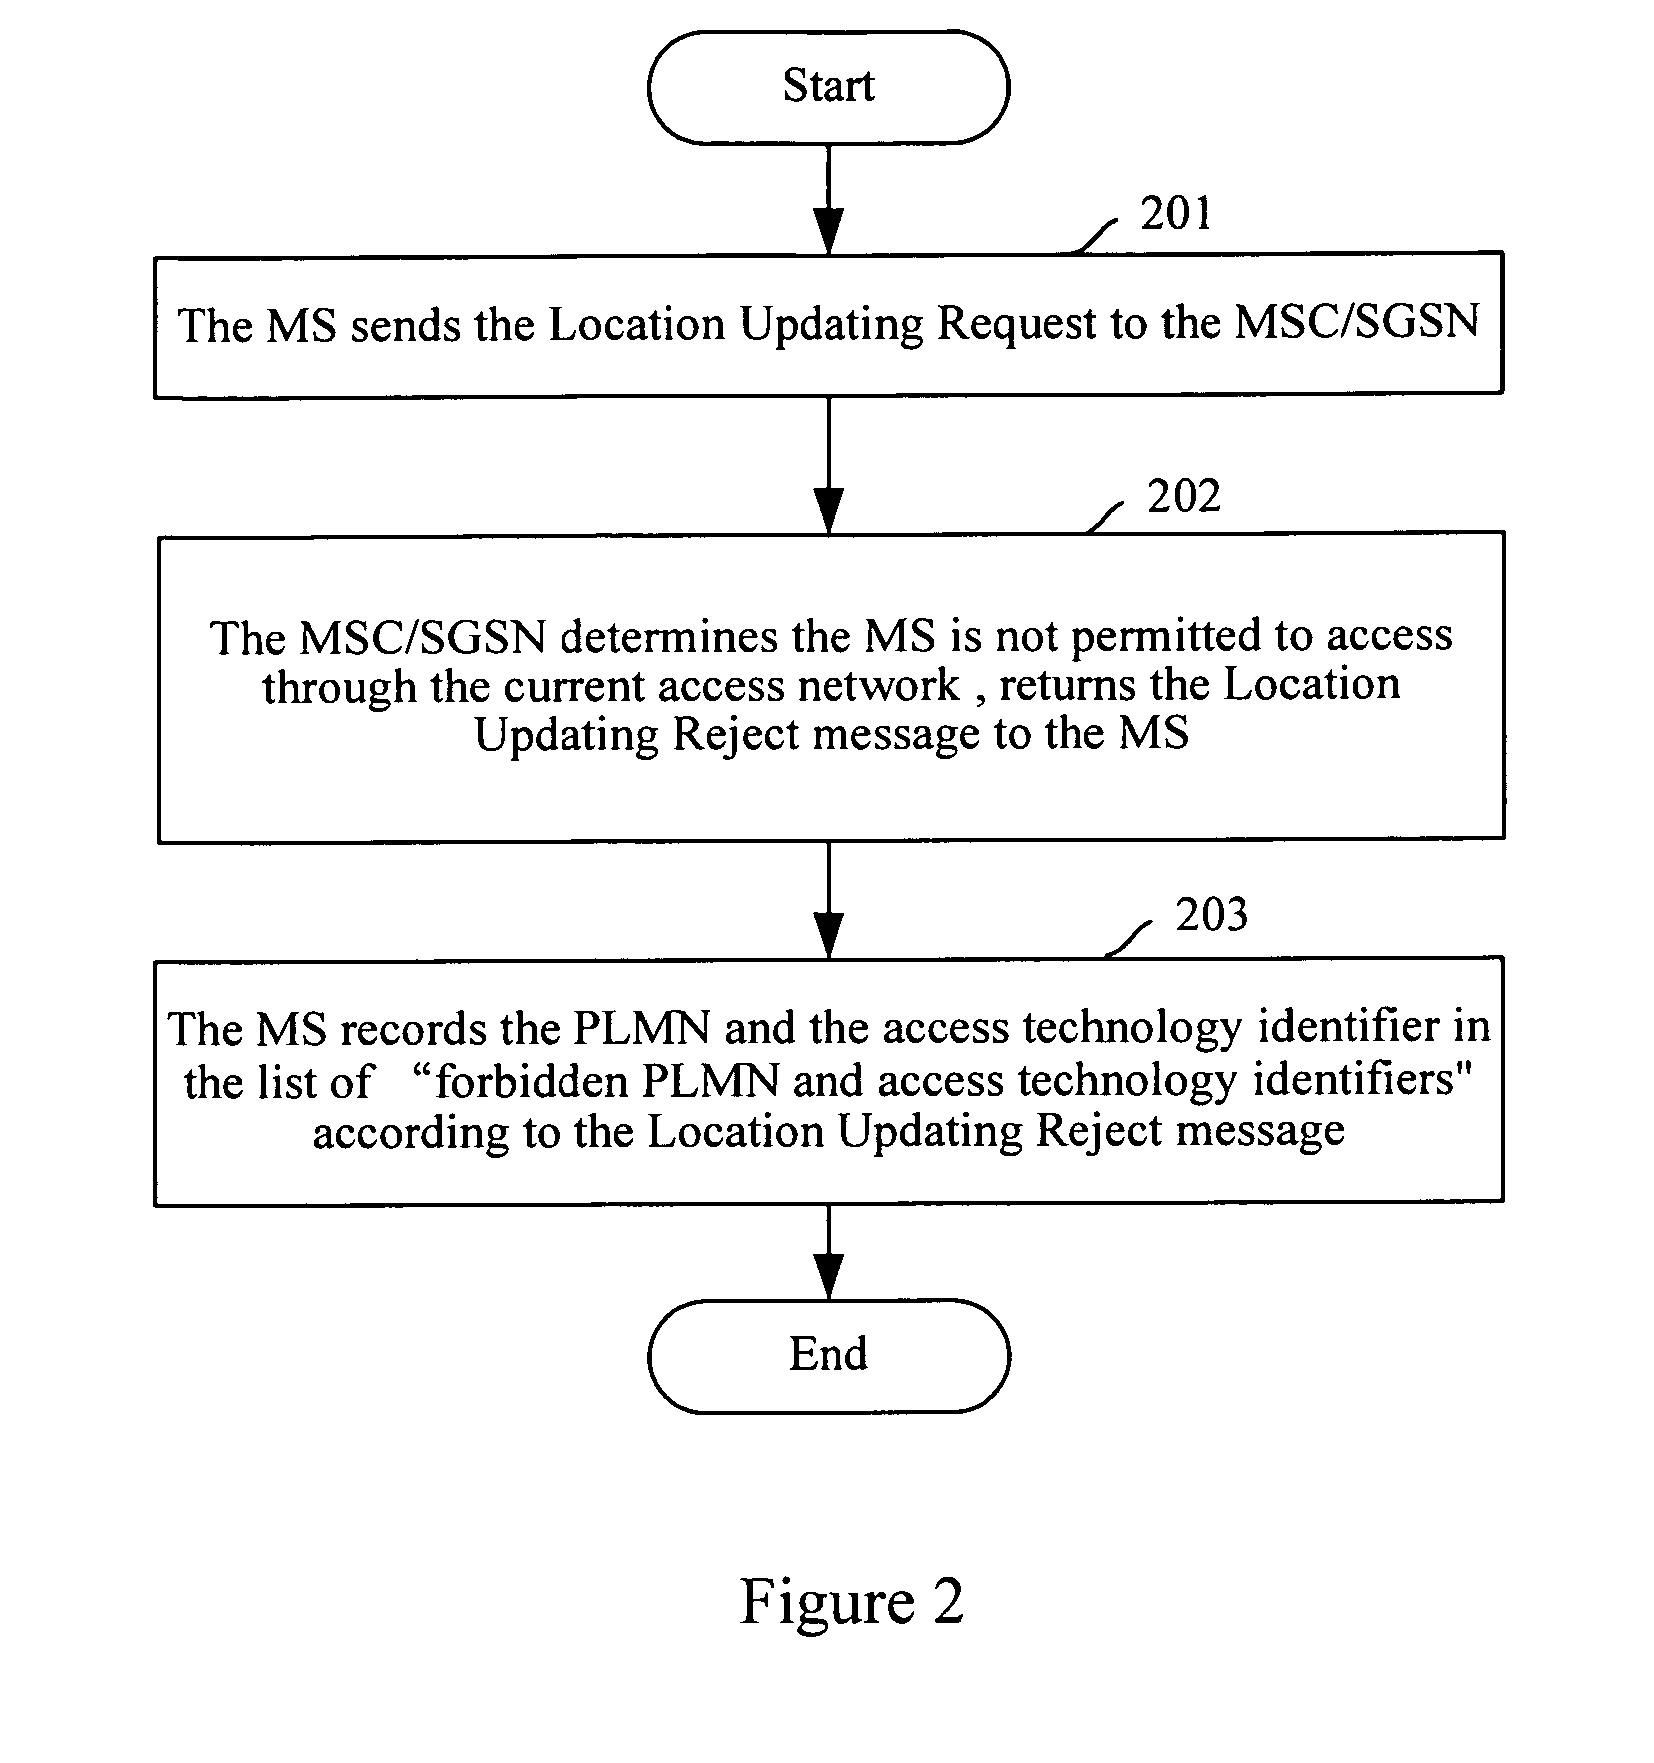 Method for Implementing Access Restriction of Mobile Networks